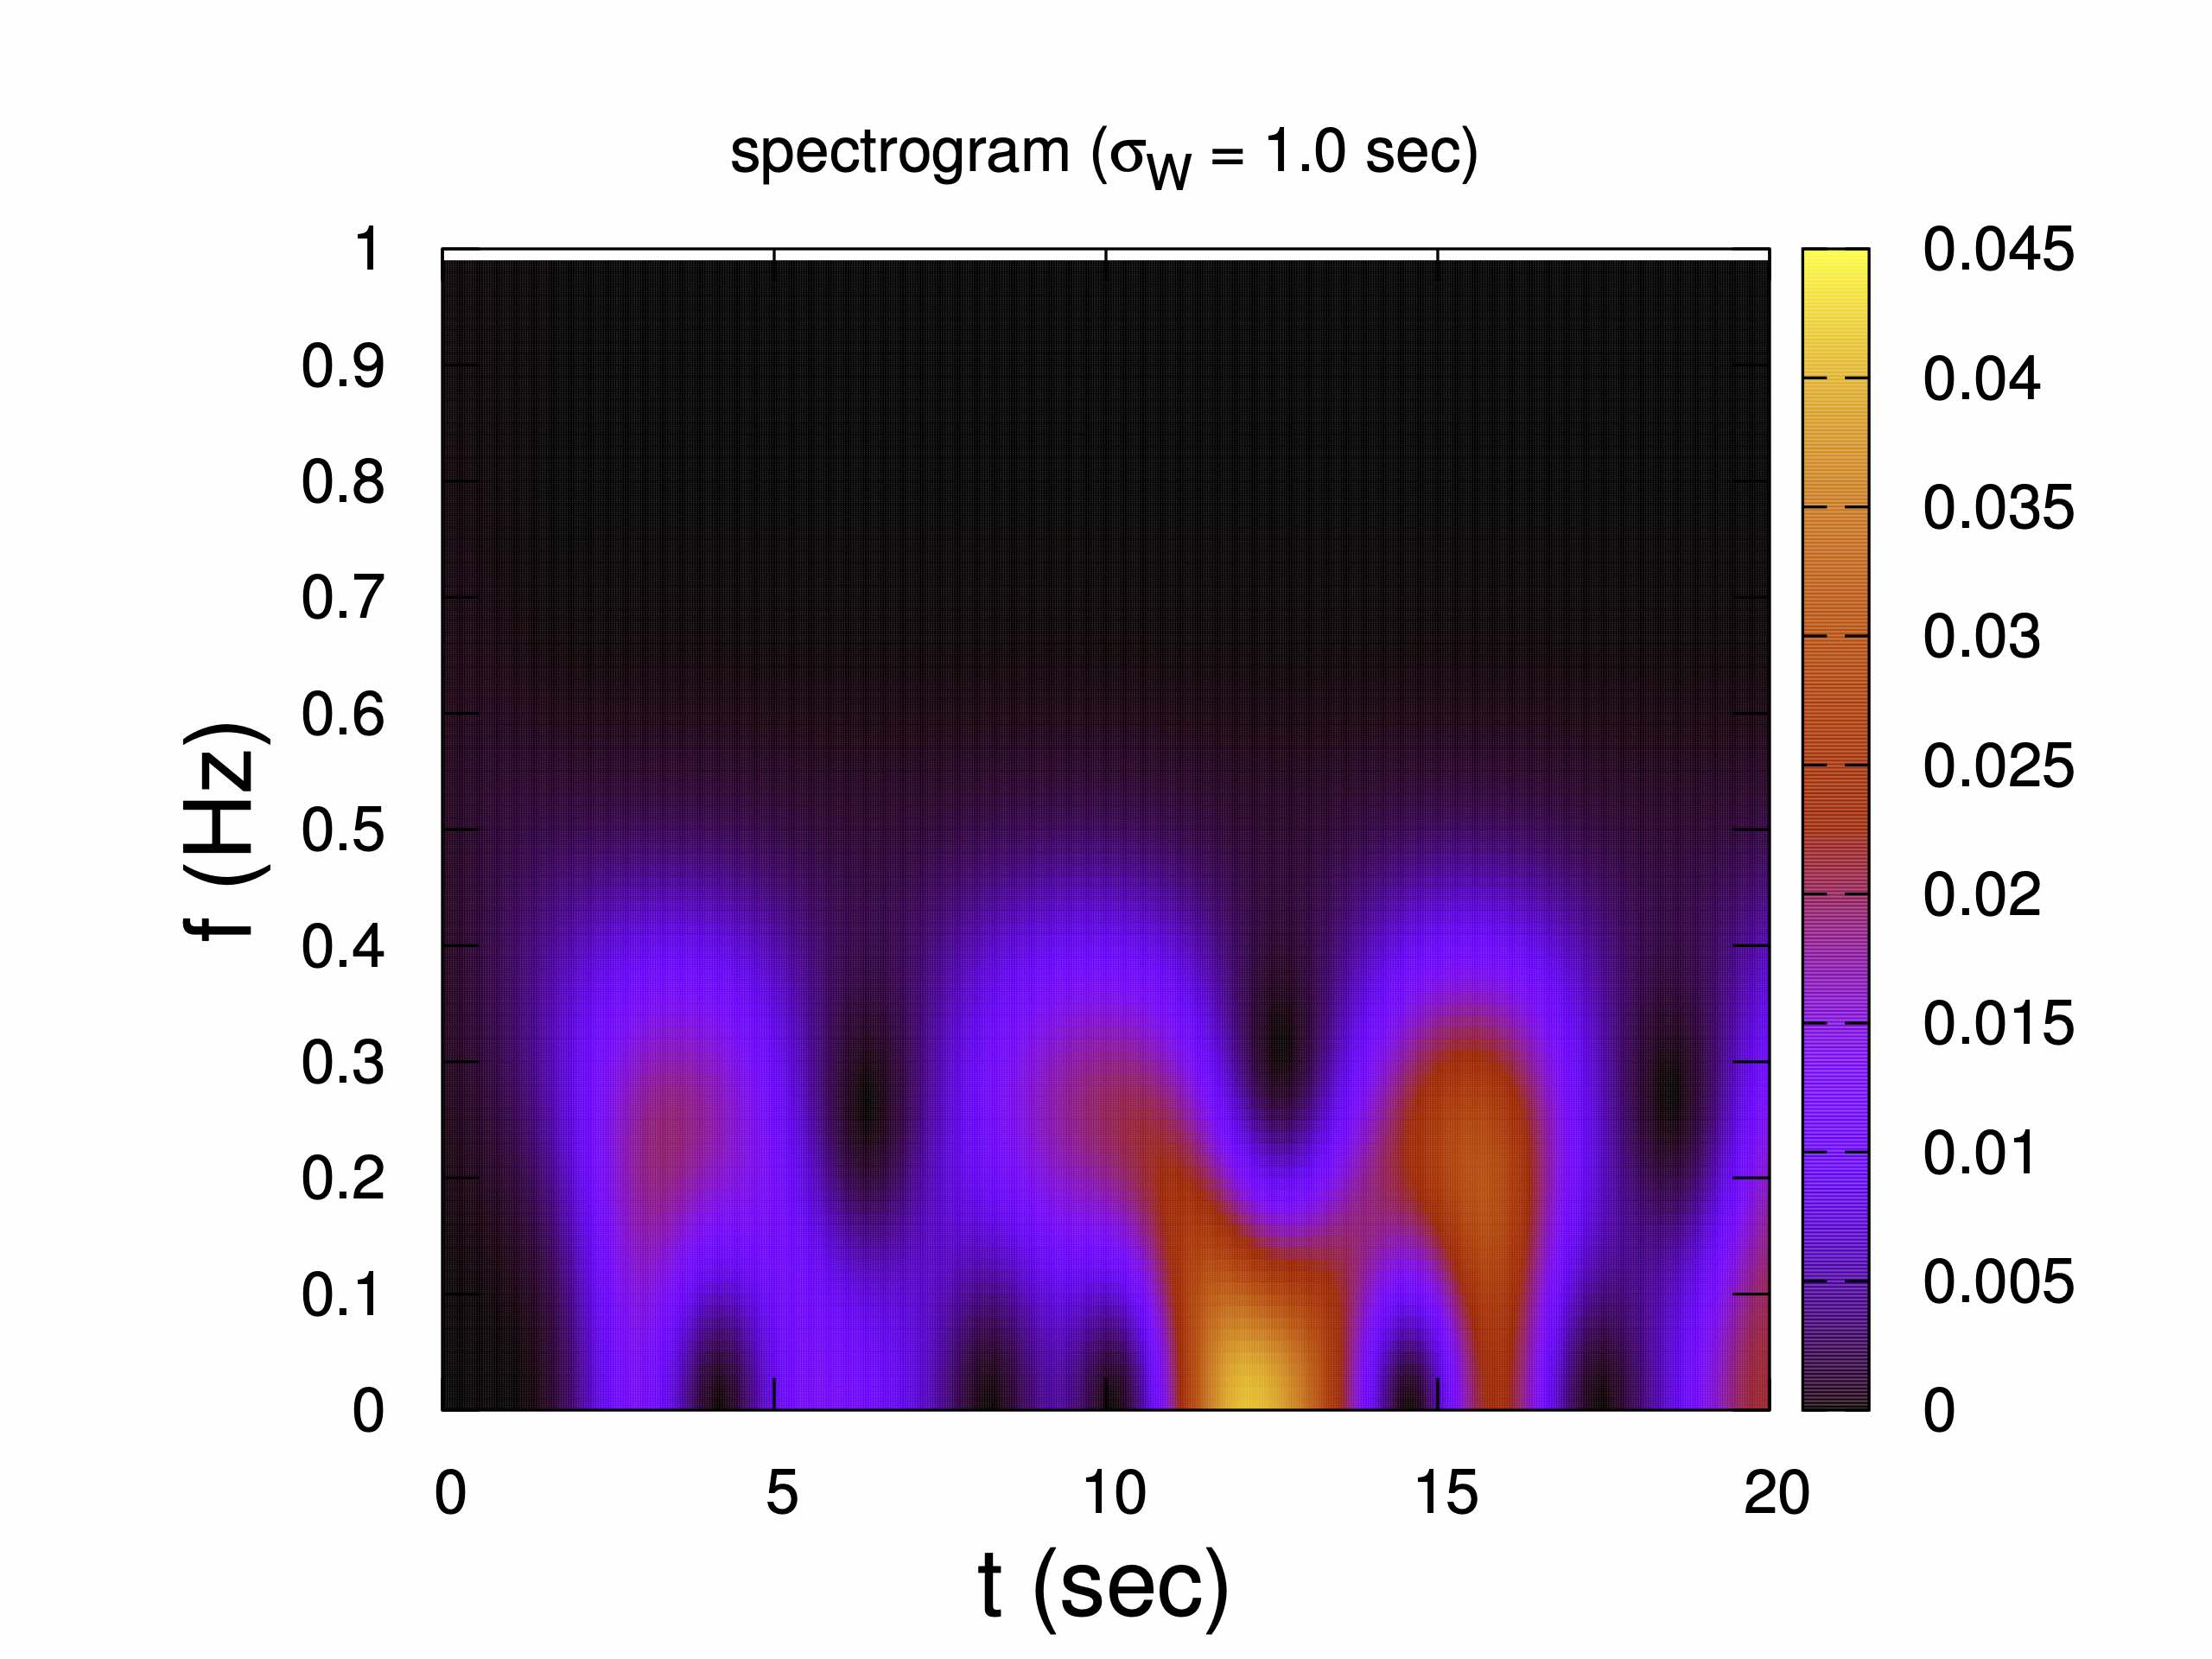 spectrogram of the example signal and window function with an intermediate width